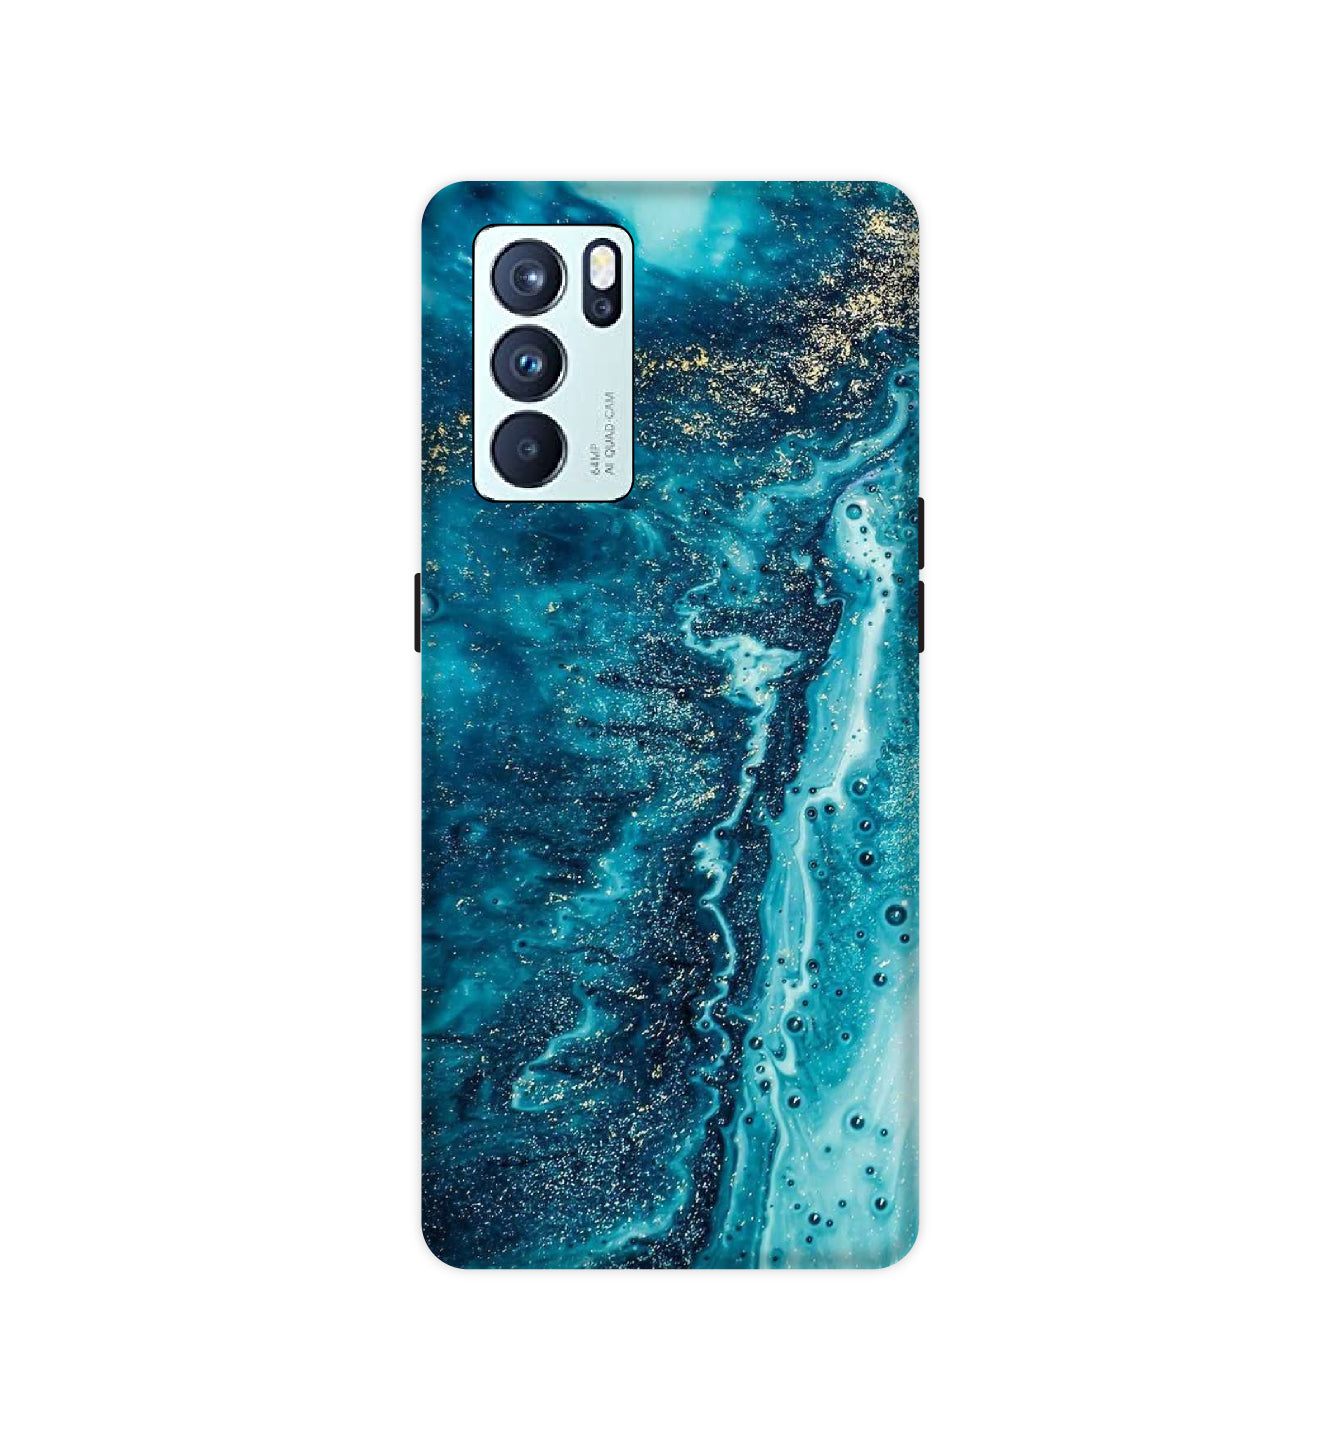 Blue Watermarble - Hard Cases For Oppo Models